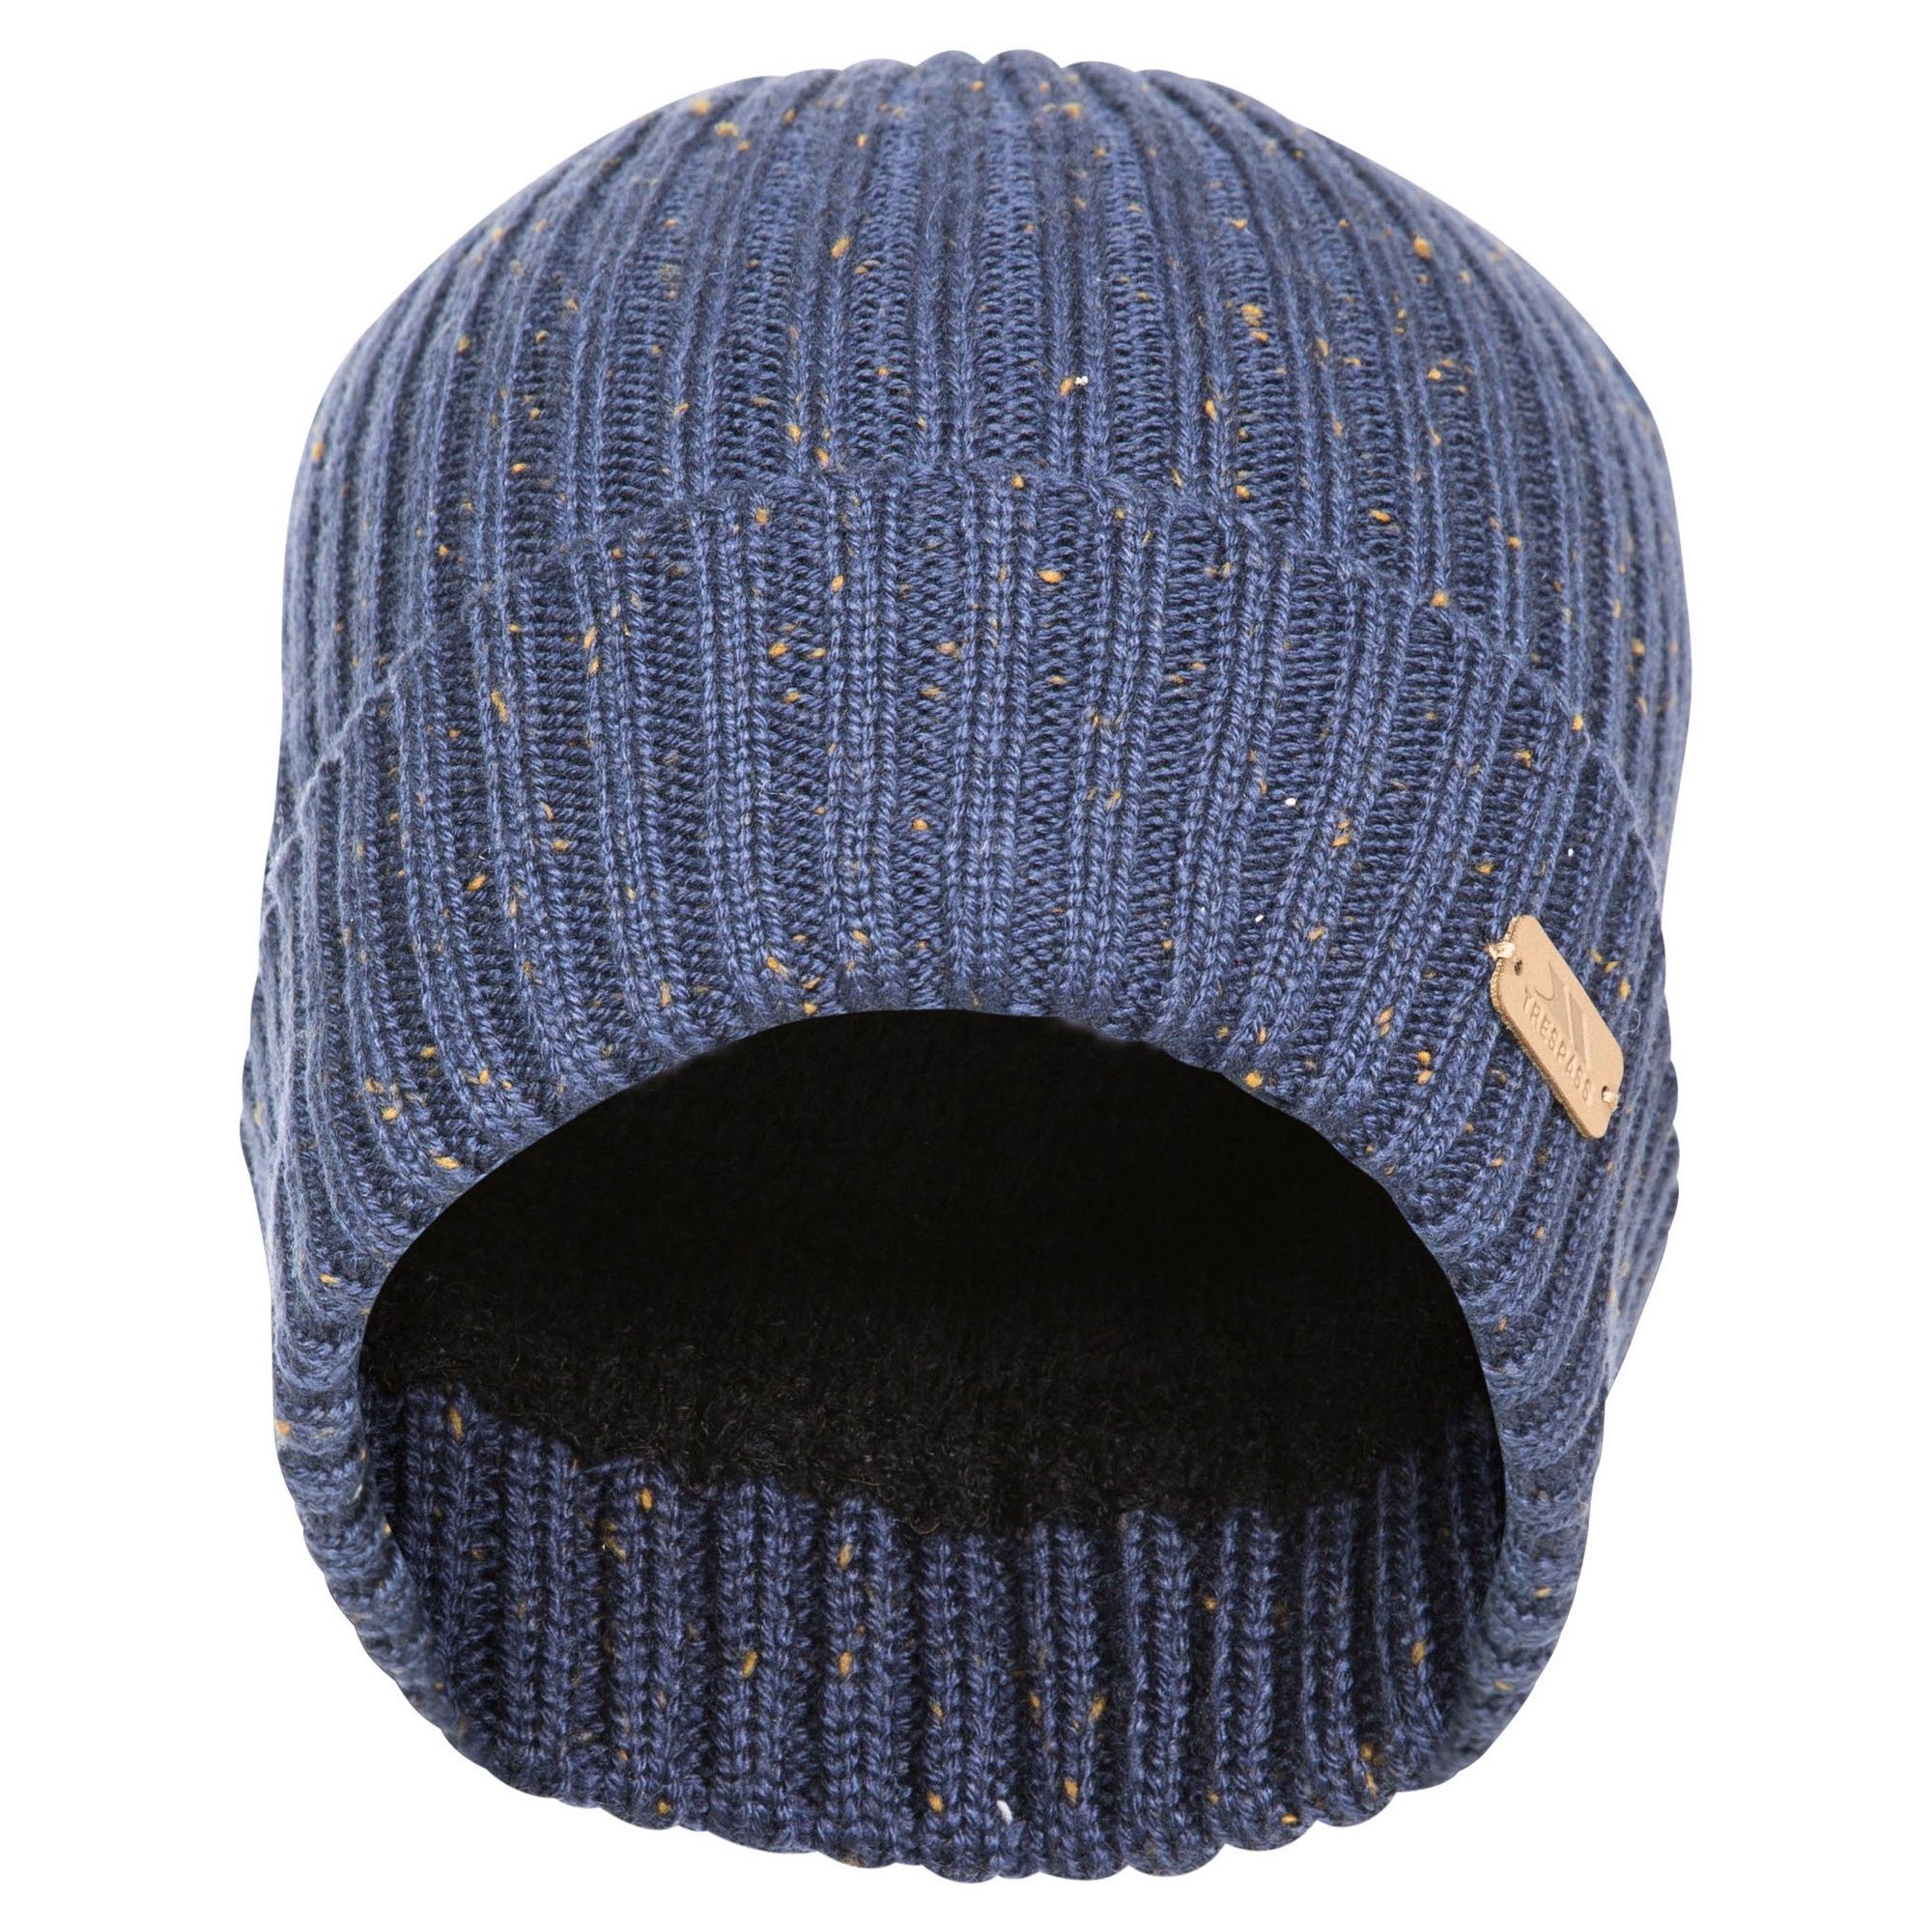 Outer: 100% Acrylic, Lining: 100% Polyamide. Knitted slouch hat. Soft chenille lining. Leatherette badge.